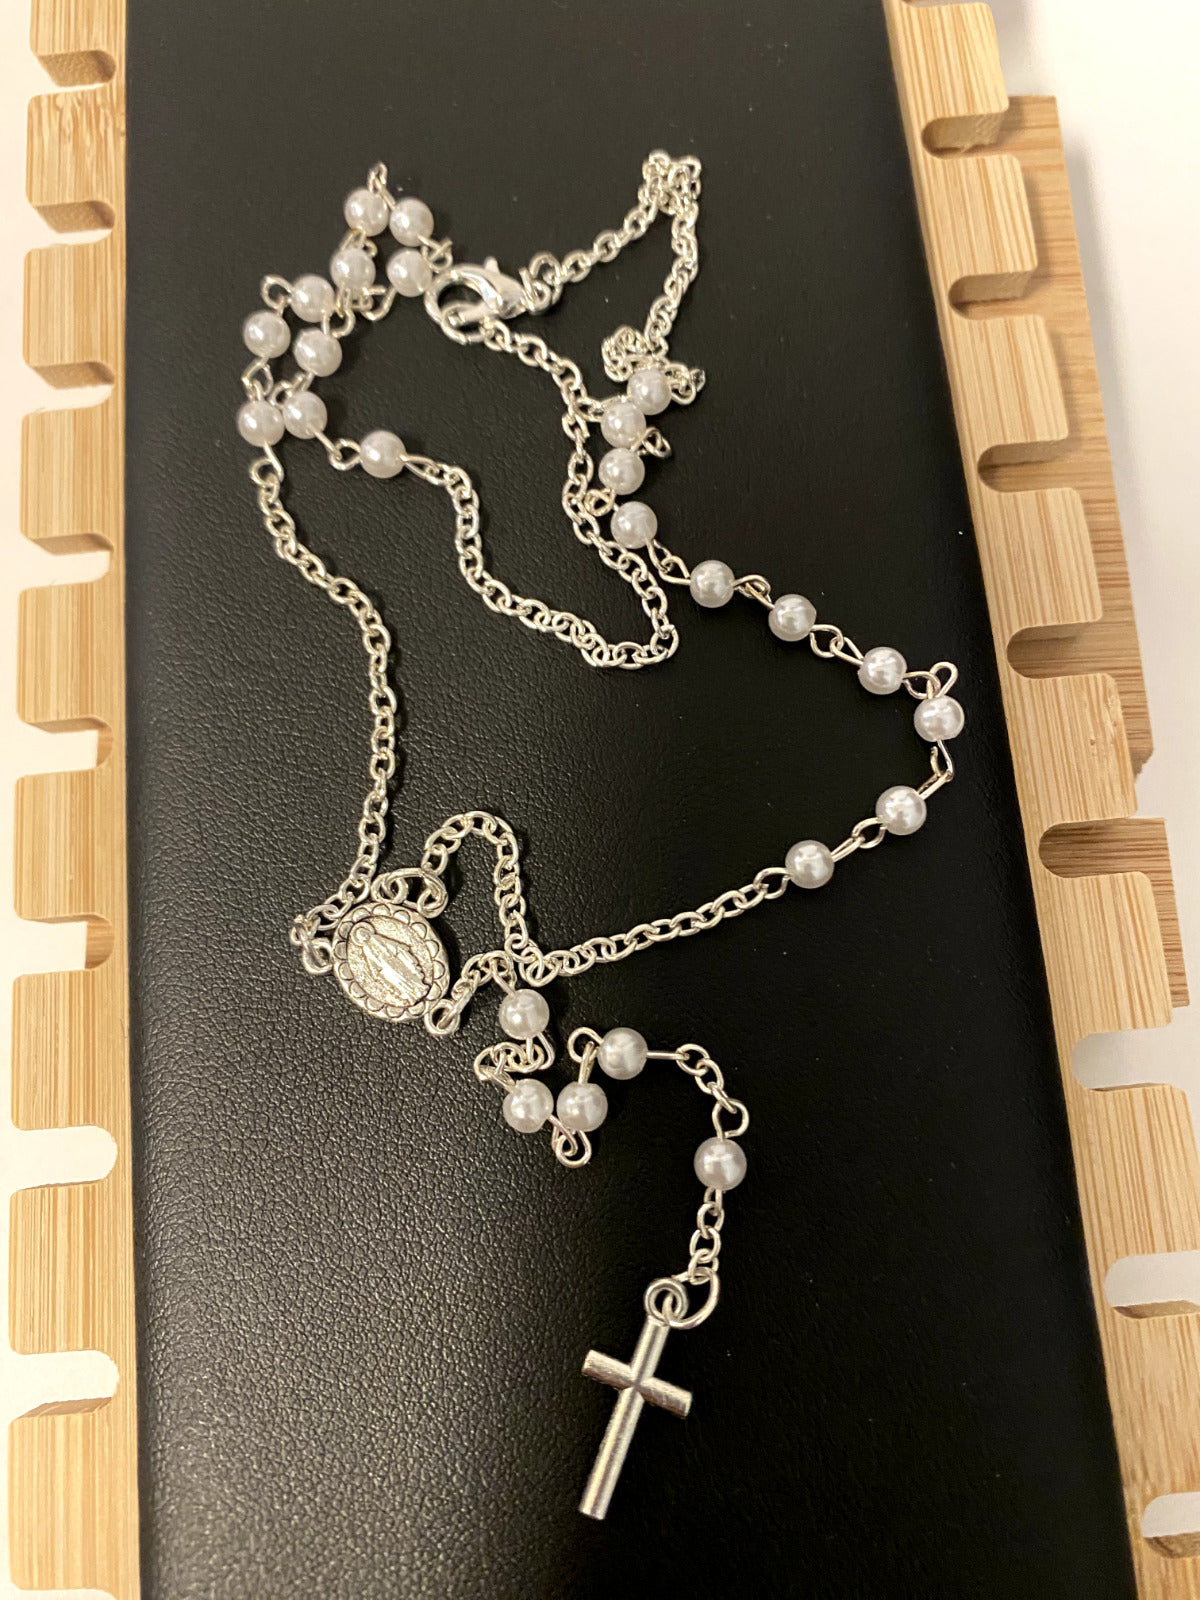 White Faux Pearl  Rosary 18" L  Necklace, New  #AB-089 - Bob and Penny Lord